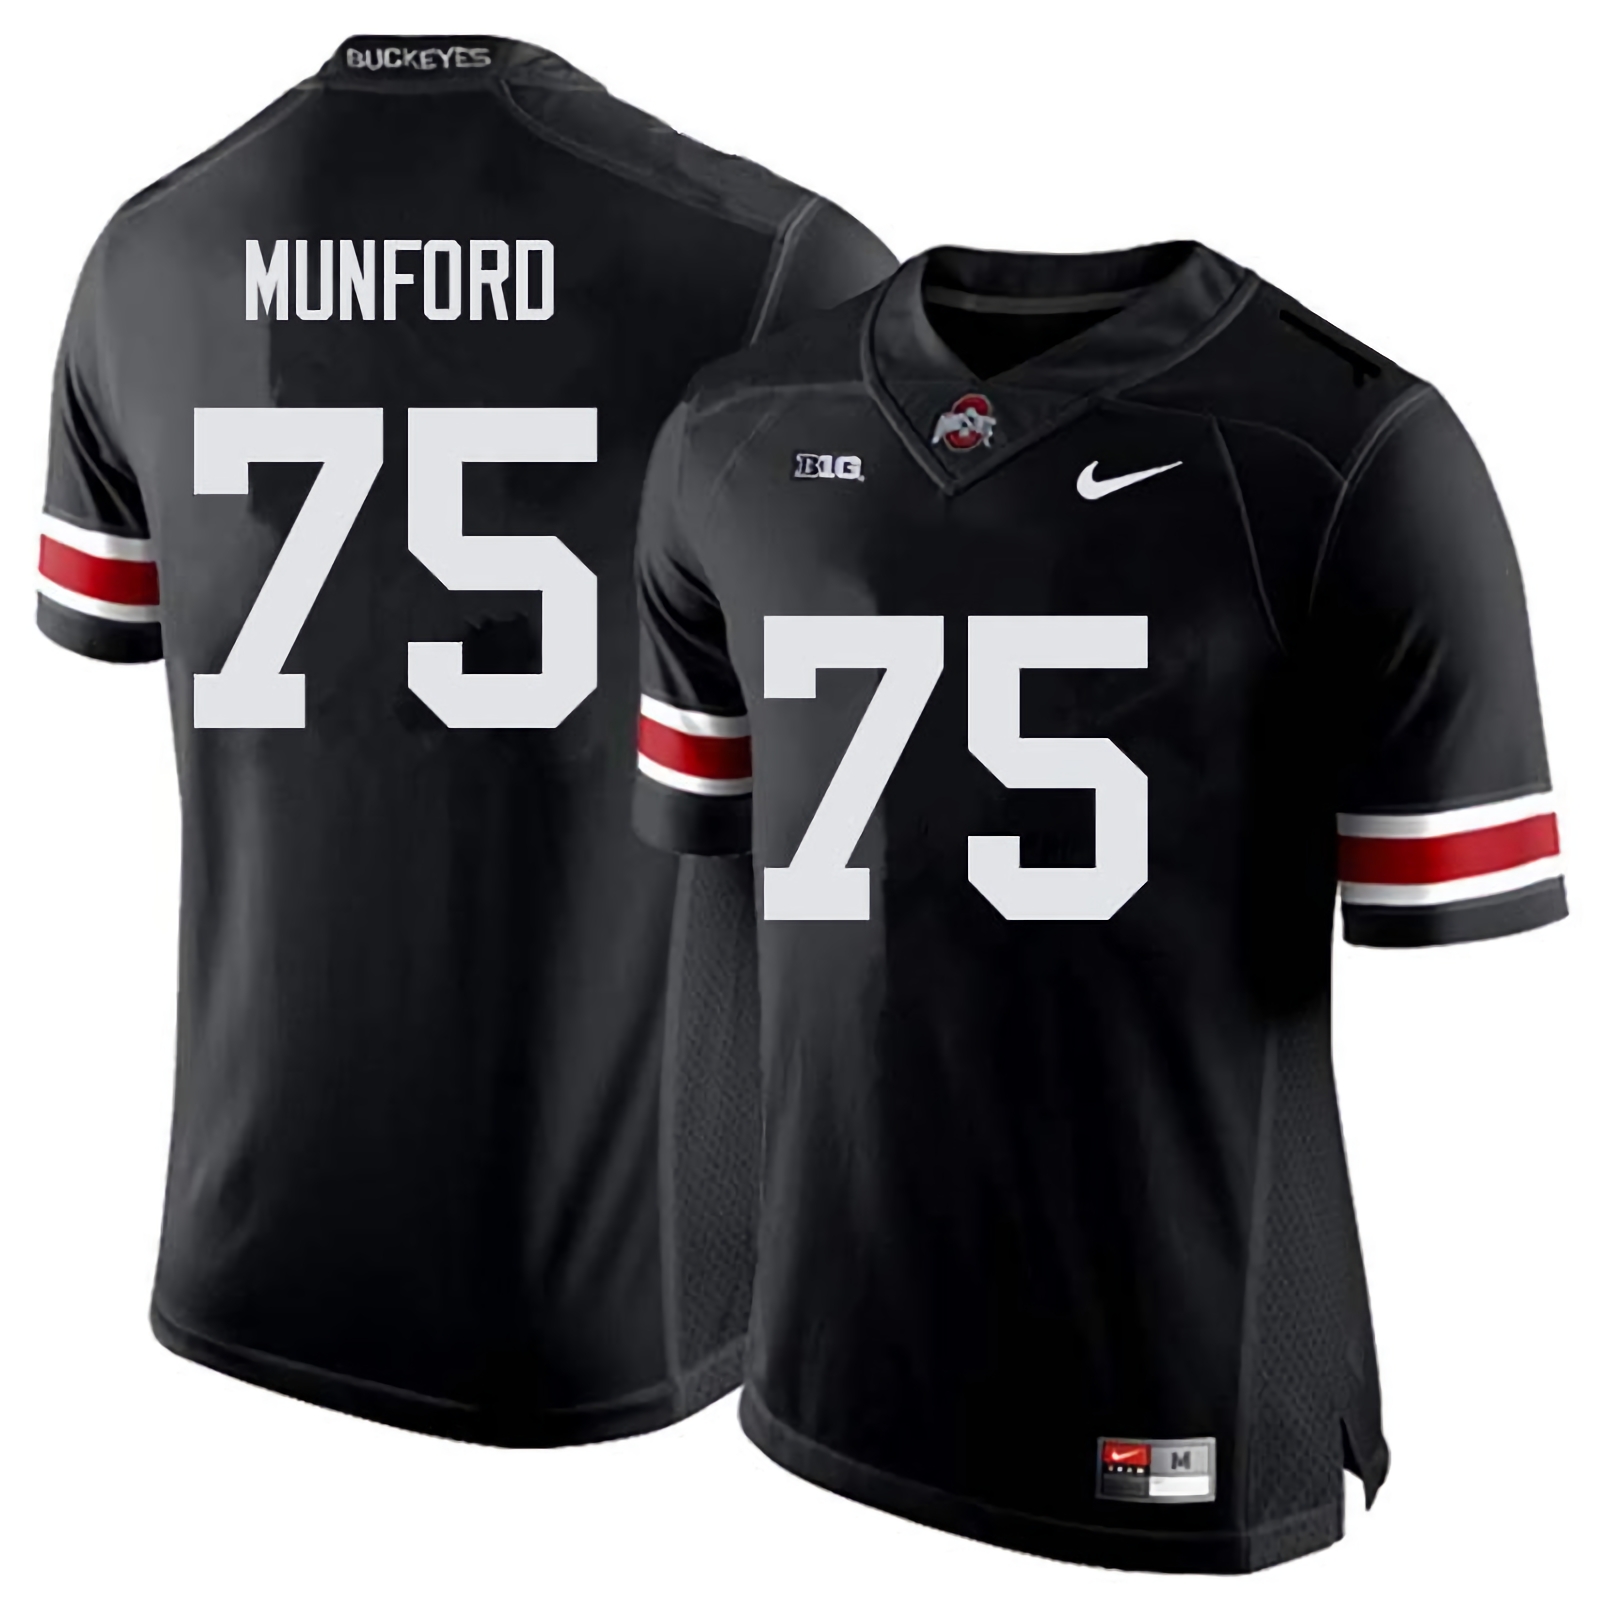 Thayer Munford Ohio State Buckeyes Men's NCAA #75 Nike Black College Stitched Football Jersey PLL5056UY